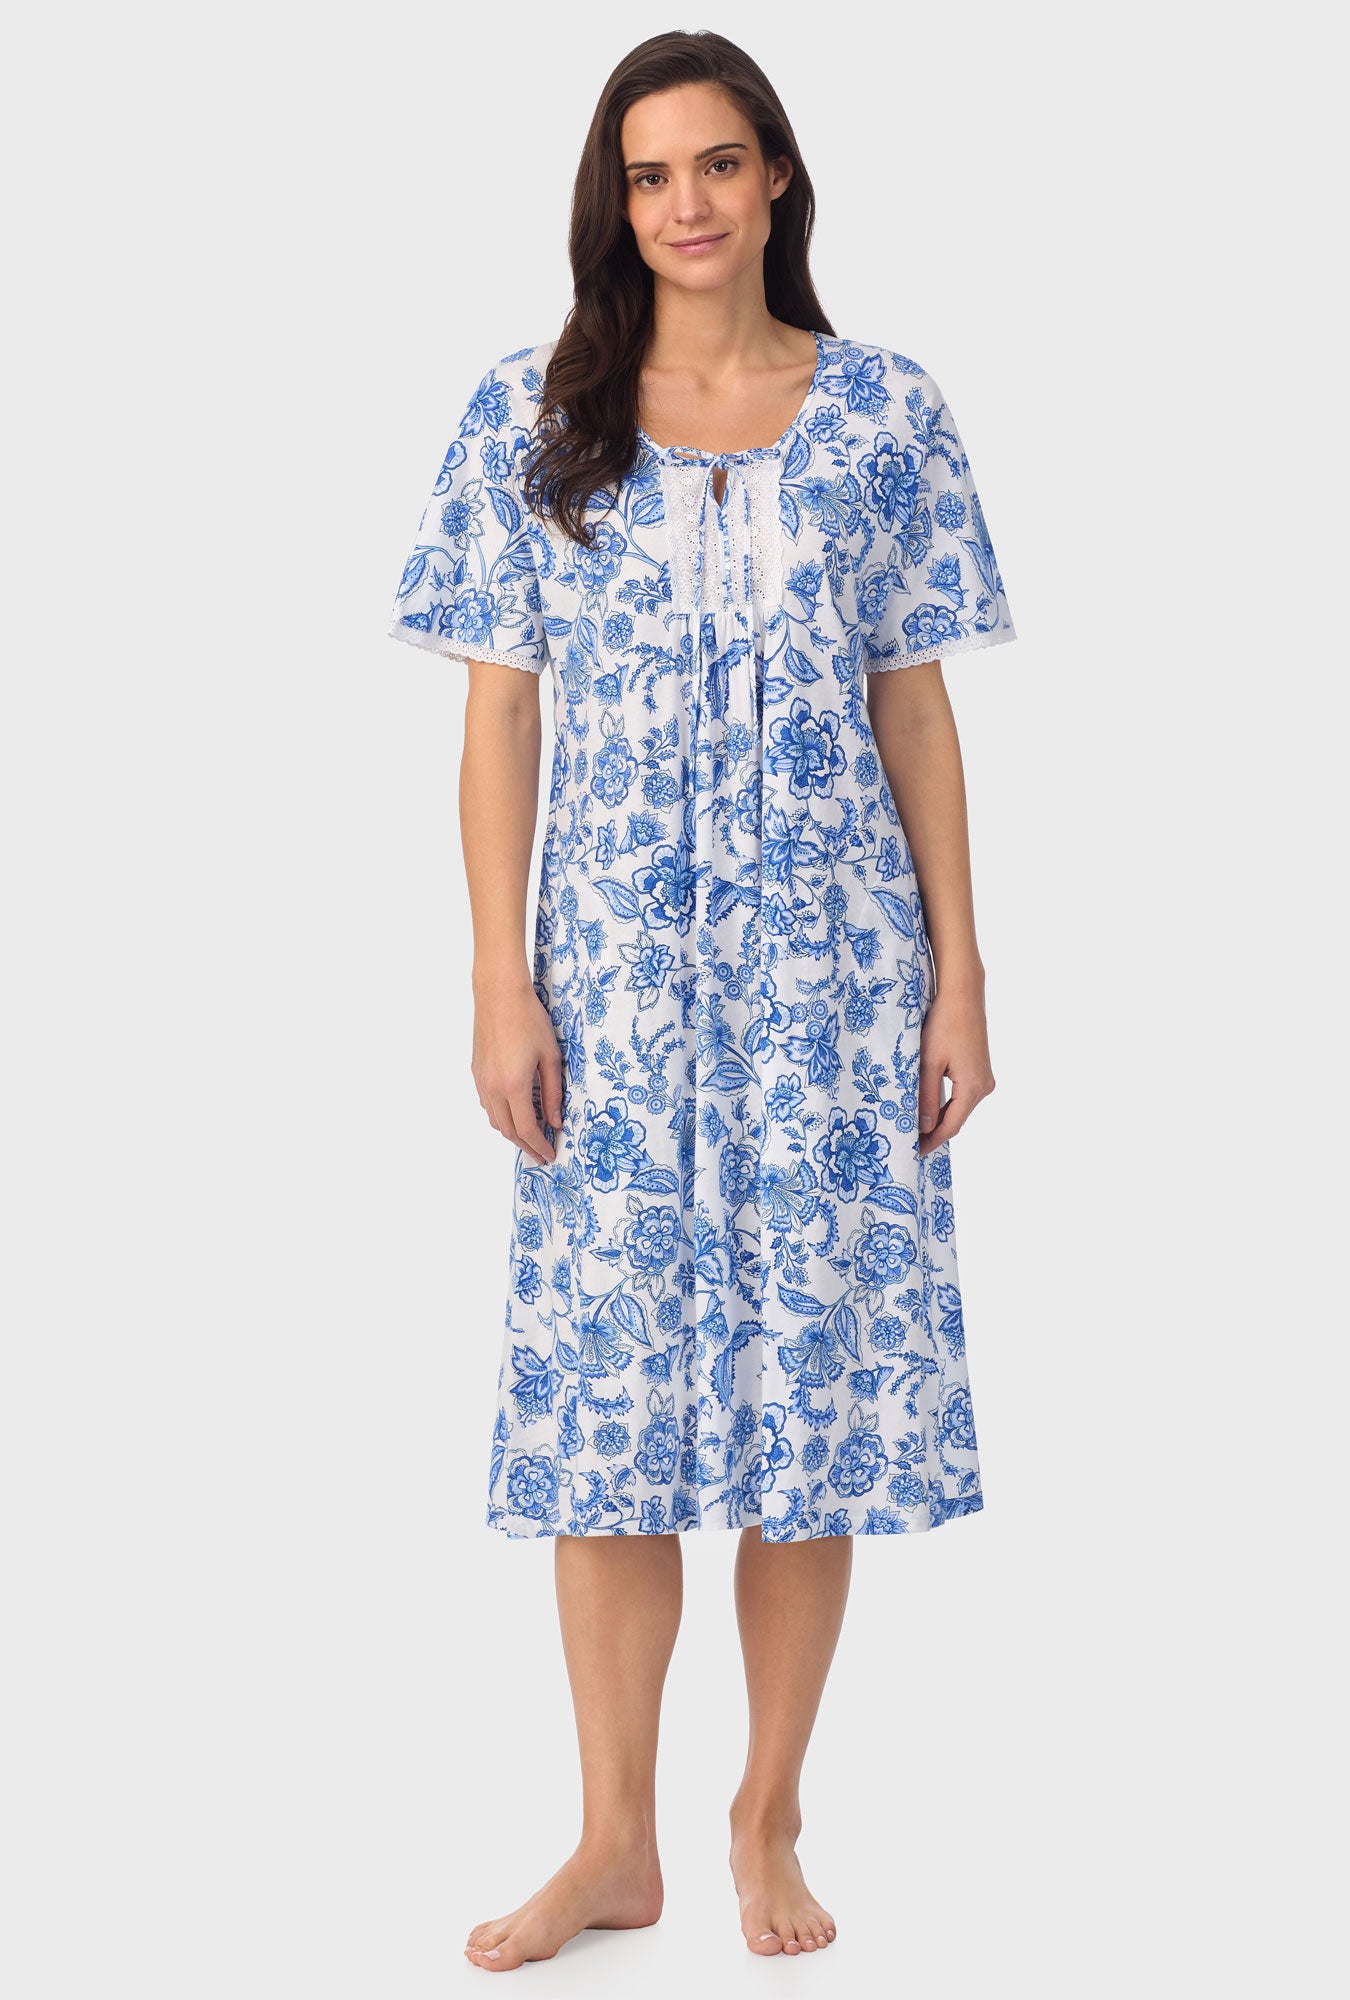 A lady wearing blue short Sleeve Floral Vine Caftan with Colbalt Blue print